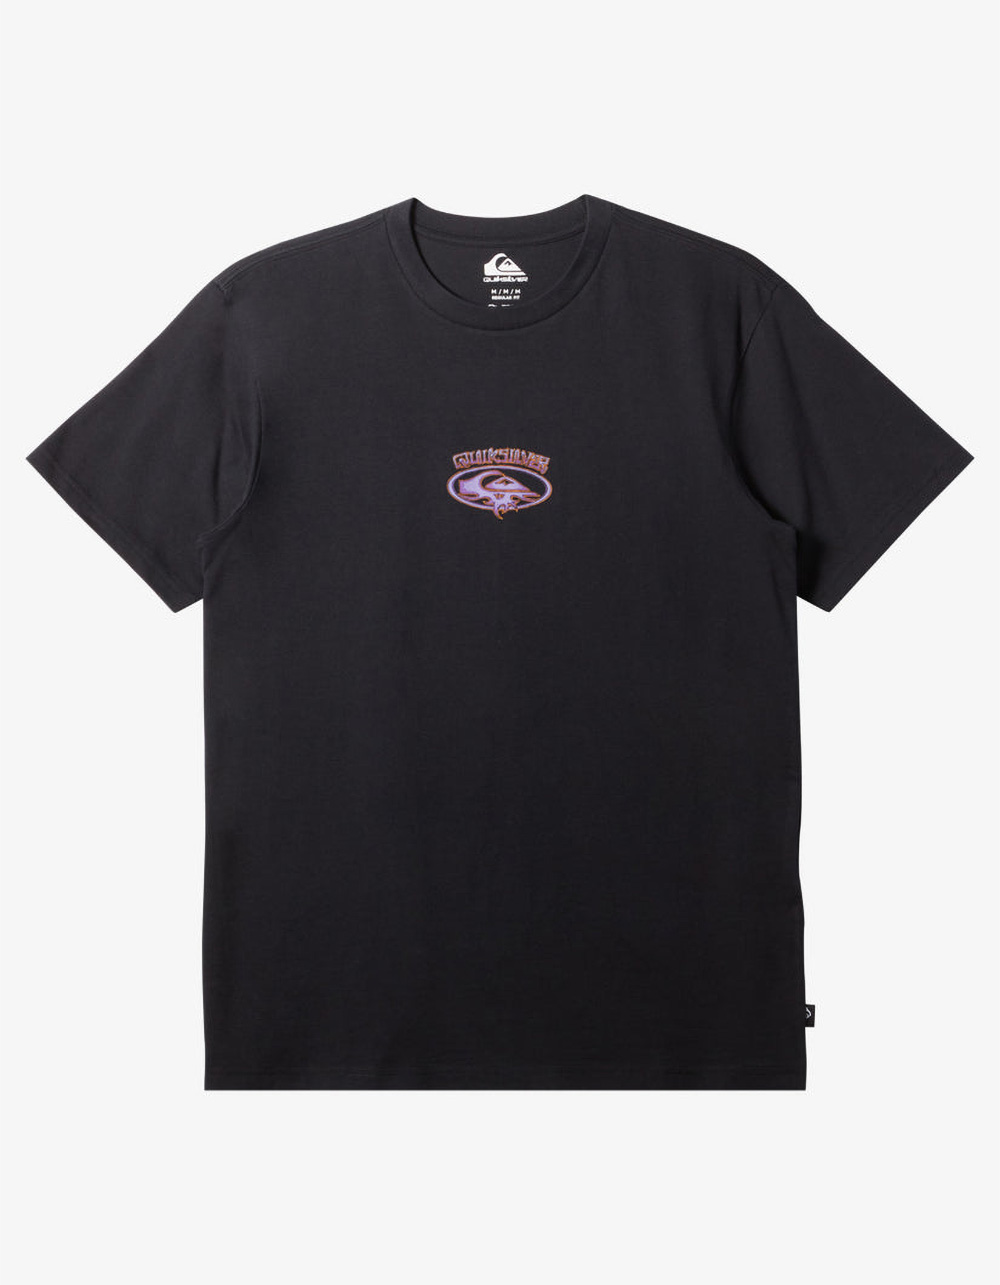 QUIKSILVER Thorn Oval Mens Tee